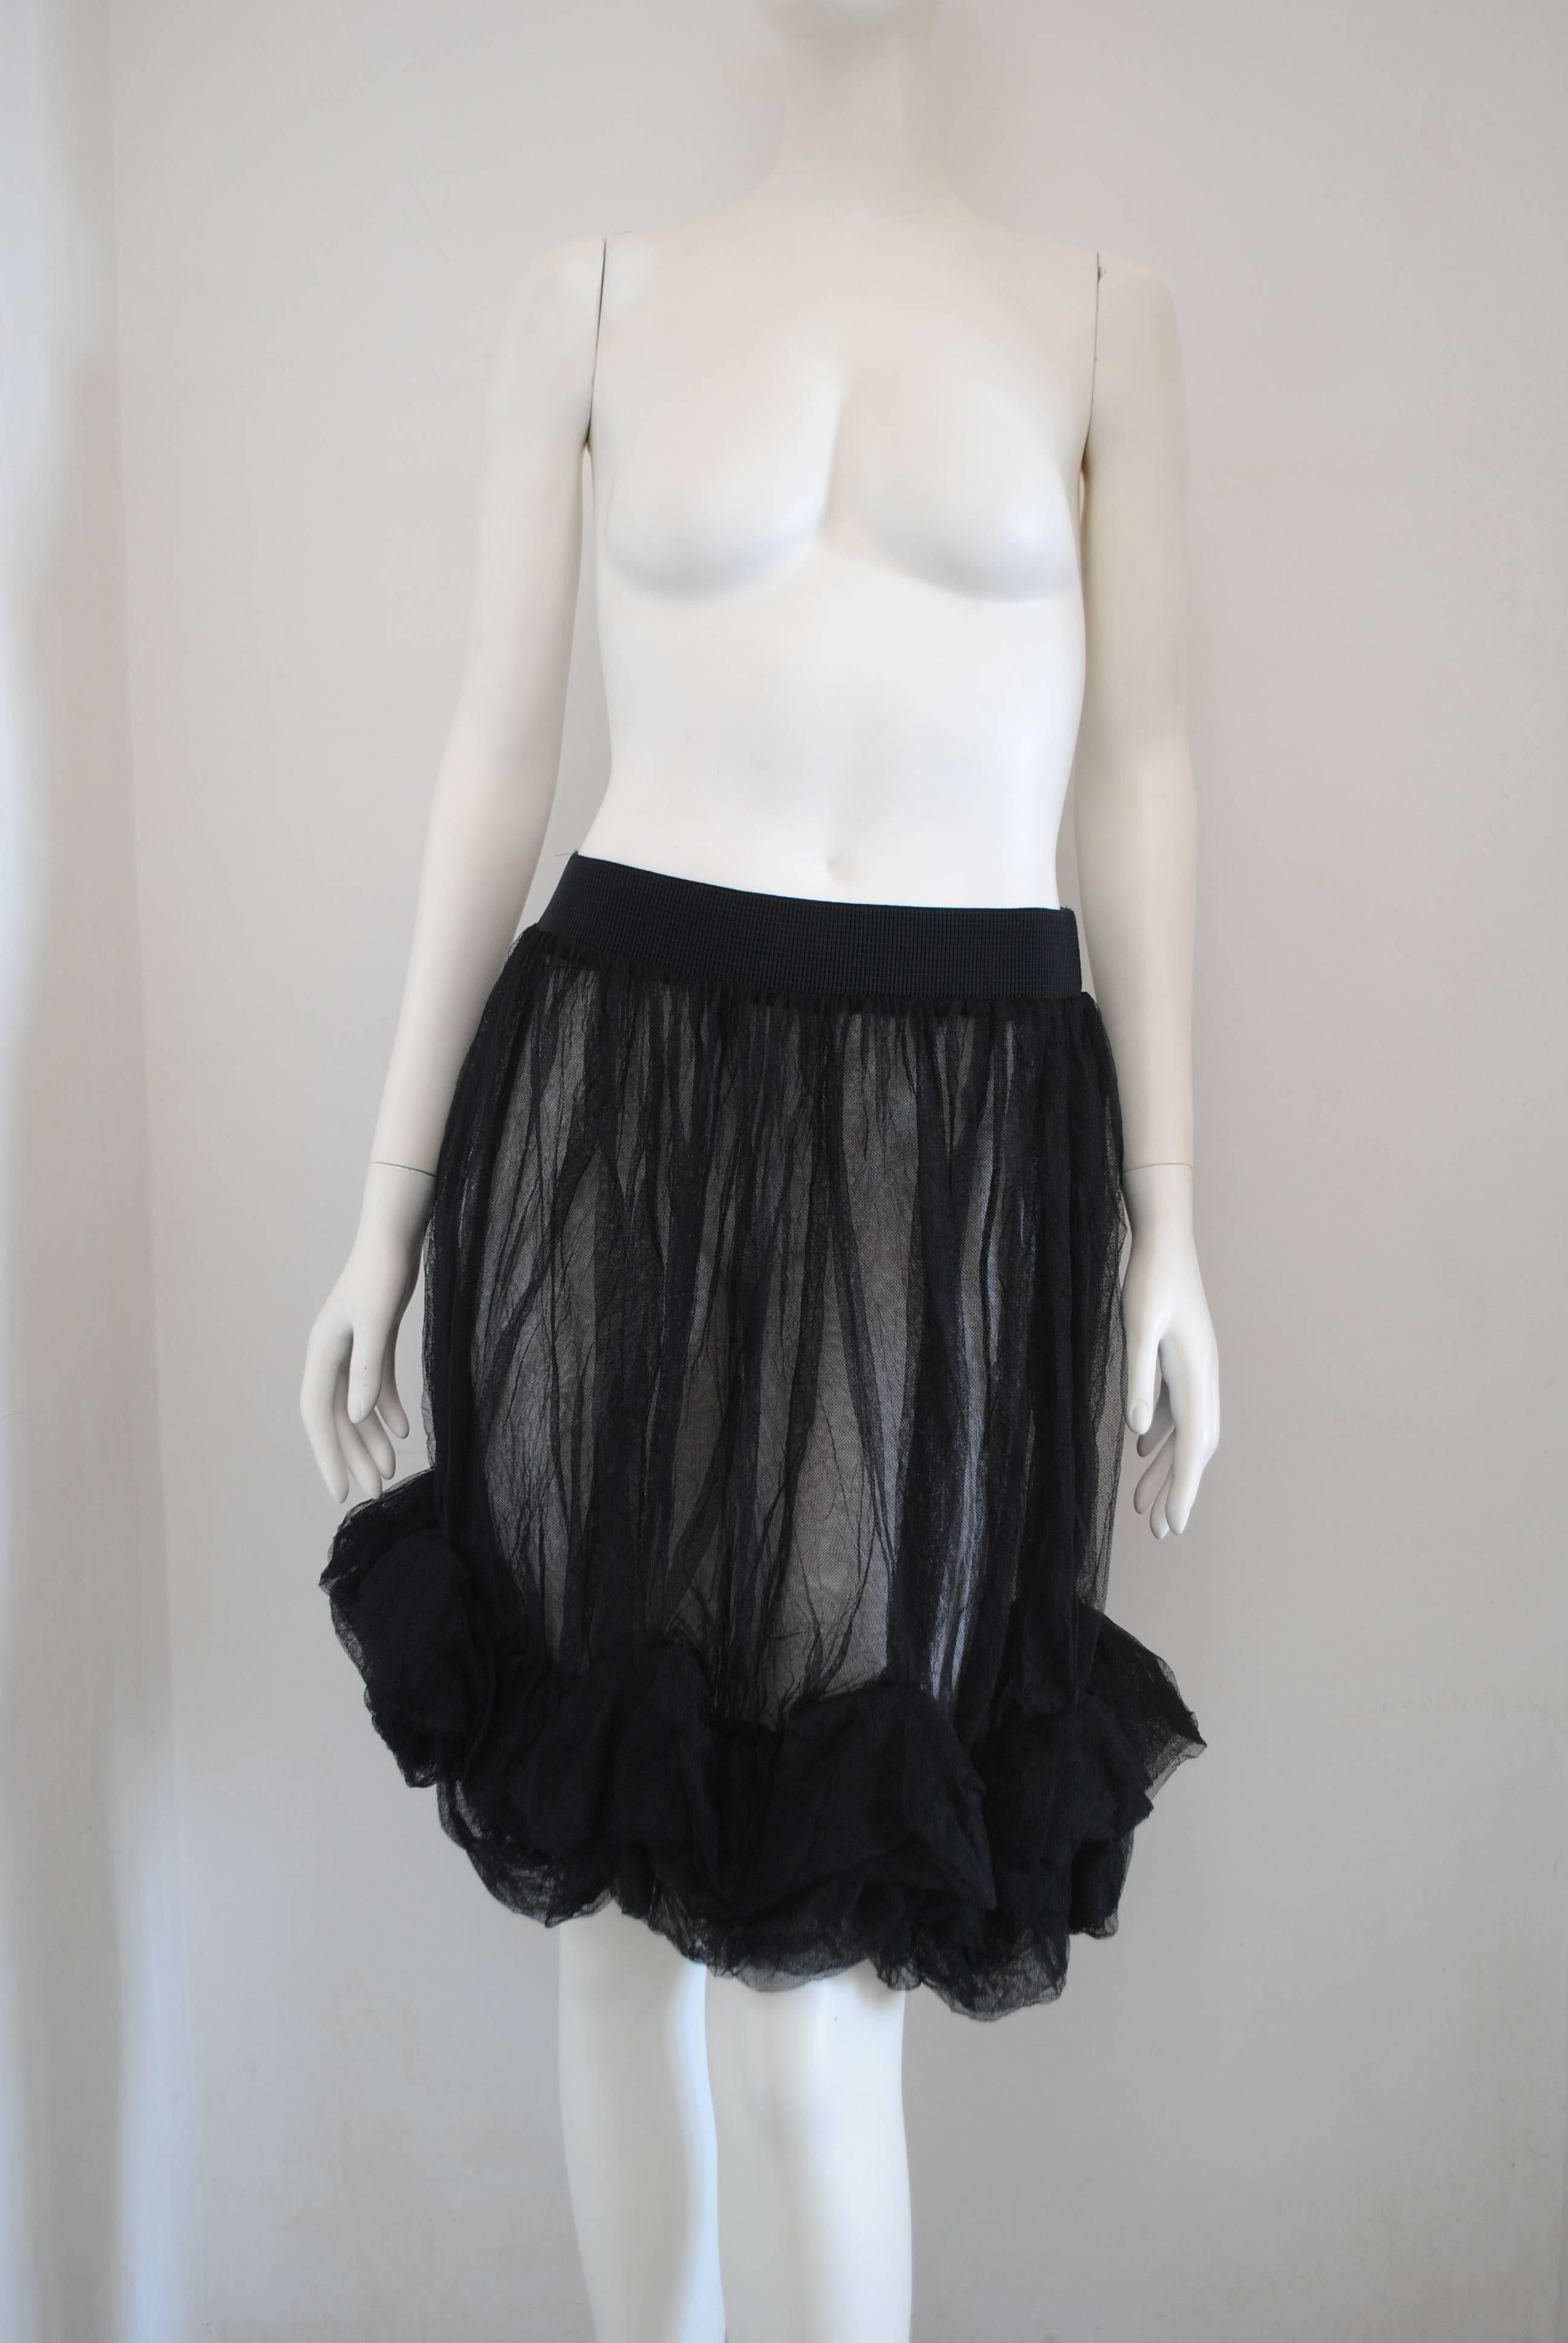 Black See Through Vintage Skirt

totally made in France in size M

Composition is polyamide

Elastic Waist: From 66 cm up to 100 cm

